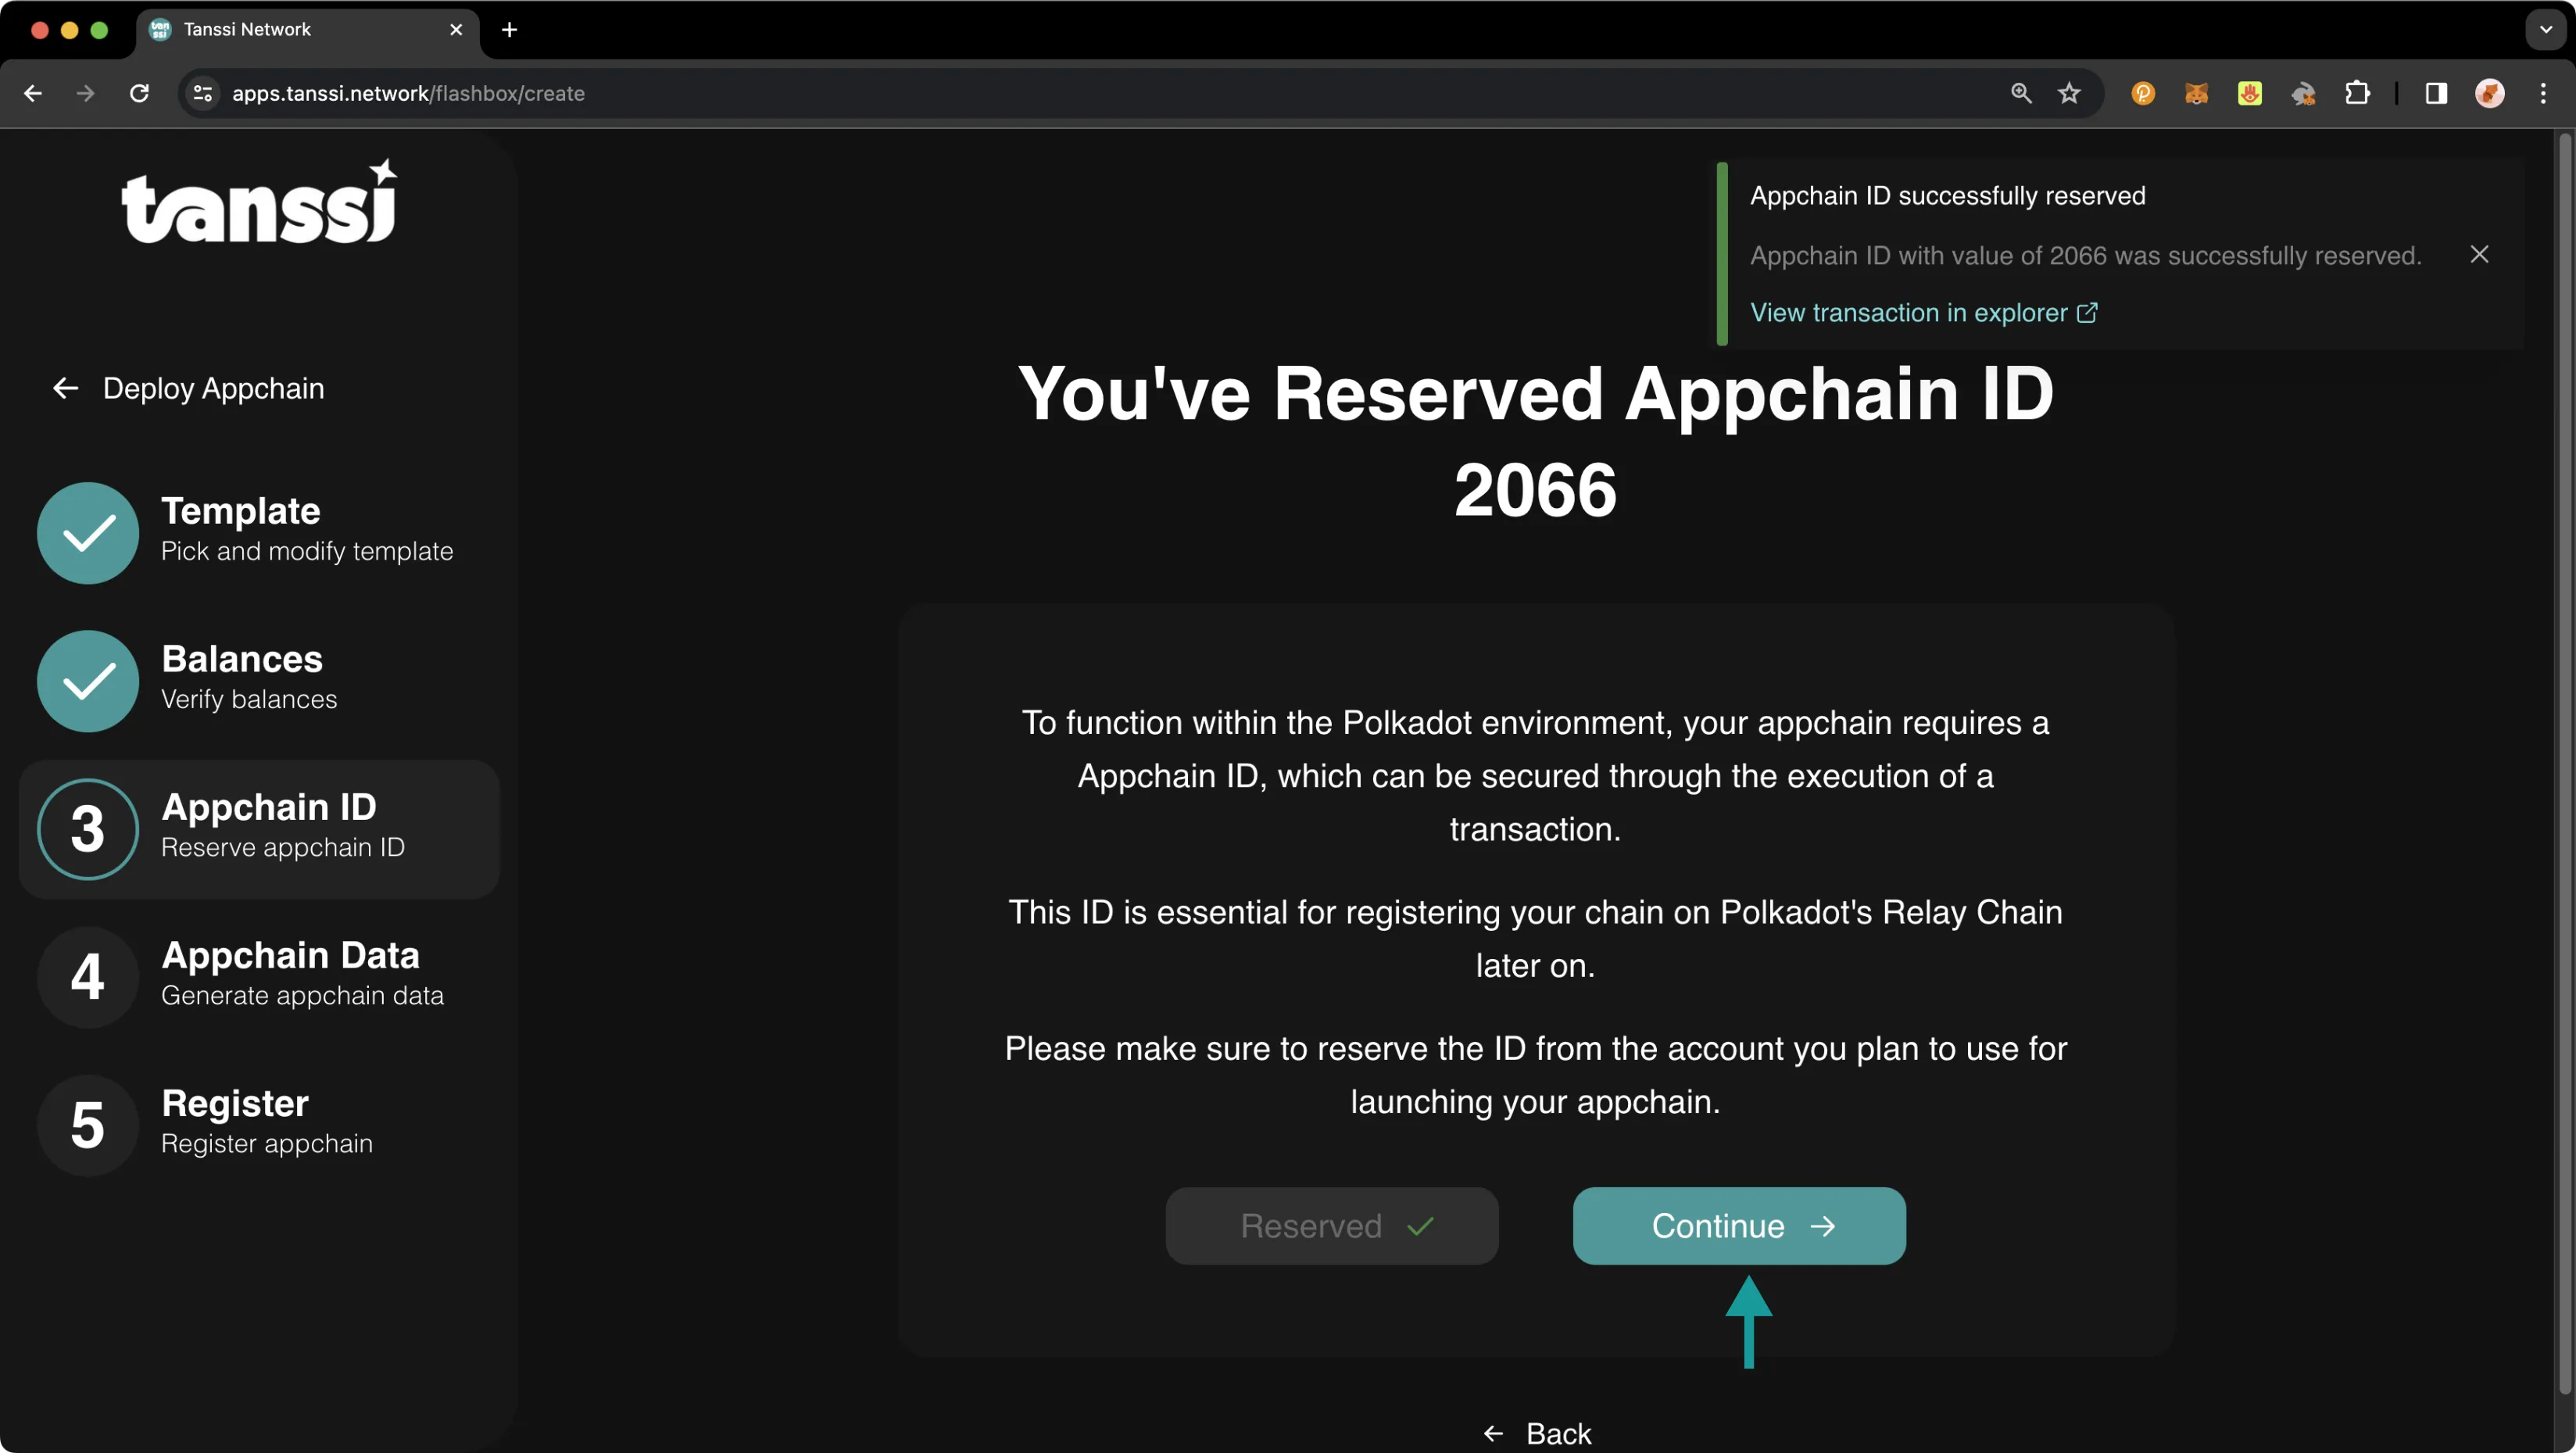 Successfully reserved your Appchain ID via the Tanssi dApp.